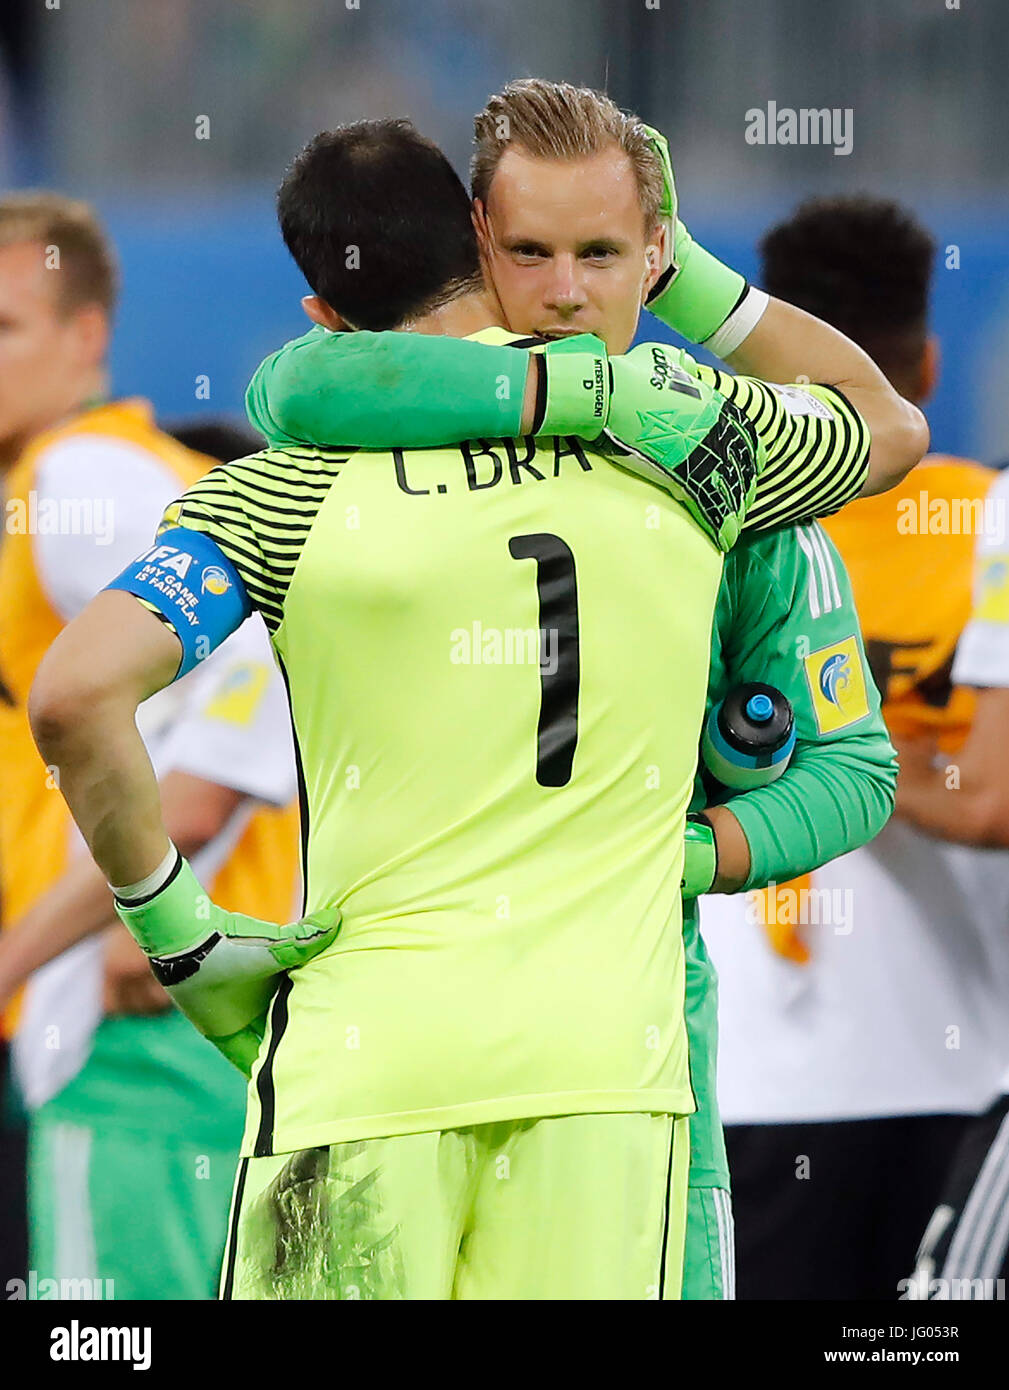 St. Petersburg, Russia. 2nd July, 2017. Claudio BRAVO of Chile is comforted by goalkeeper Marc-Andre TER STEGEN of Germany following a match between Chile and Germany valid for the final of the 2017 Confederations Cup on Sunday (2), held at the Krestovsky Stadium in St Petersburg, Russia. (Photo: Rodolfo Buhrer/La Imagem/Fotoarena) Stock Photo